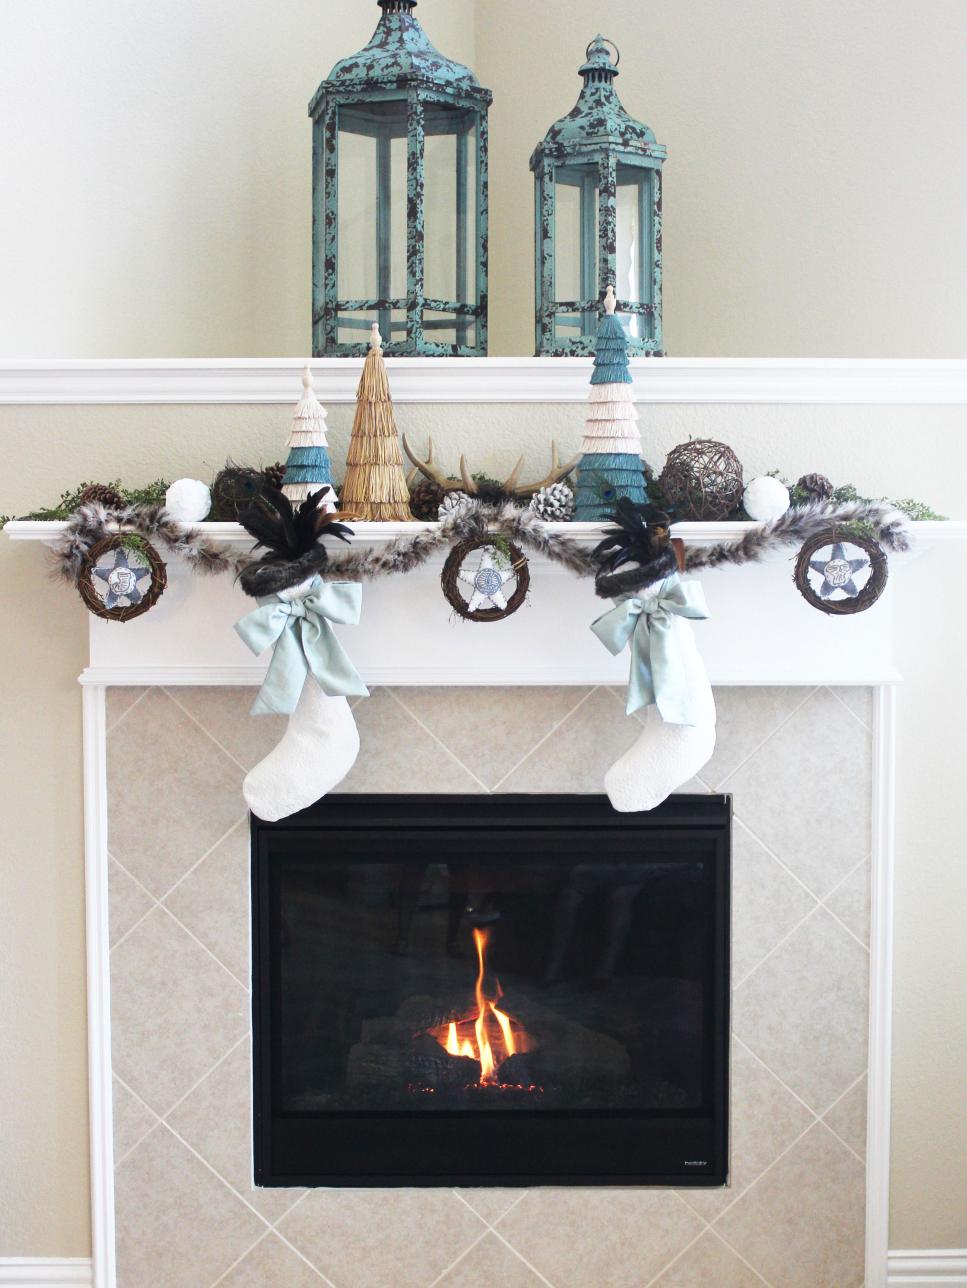 Five crafty bloggers were challenged to share their visions for the fireplace mantel design at HGTV